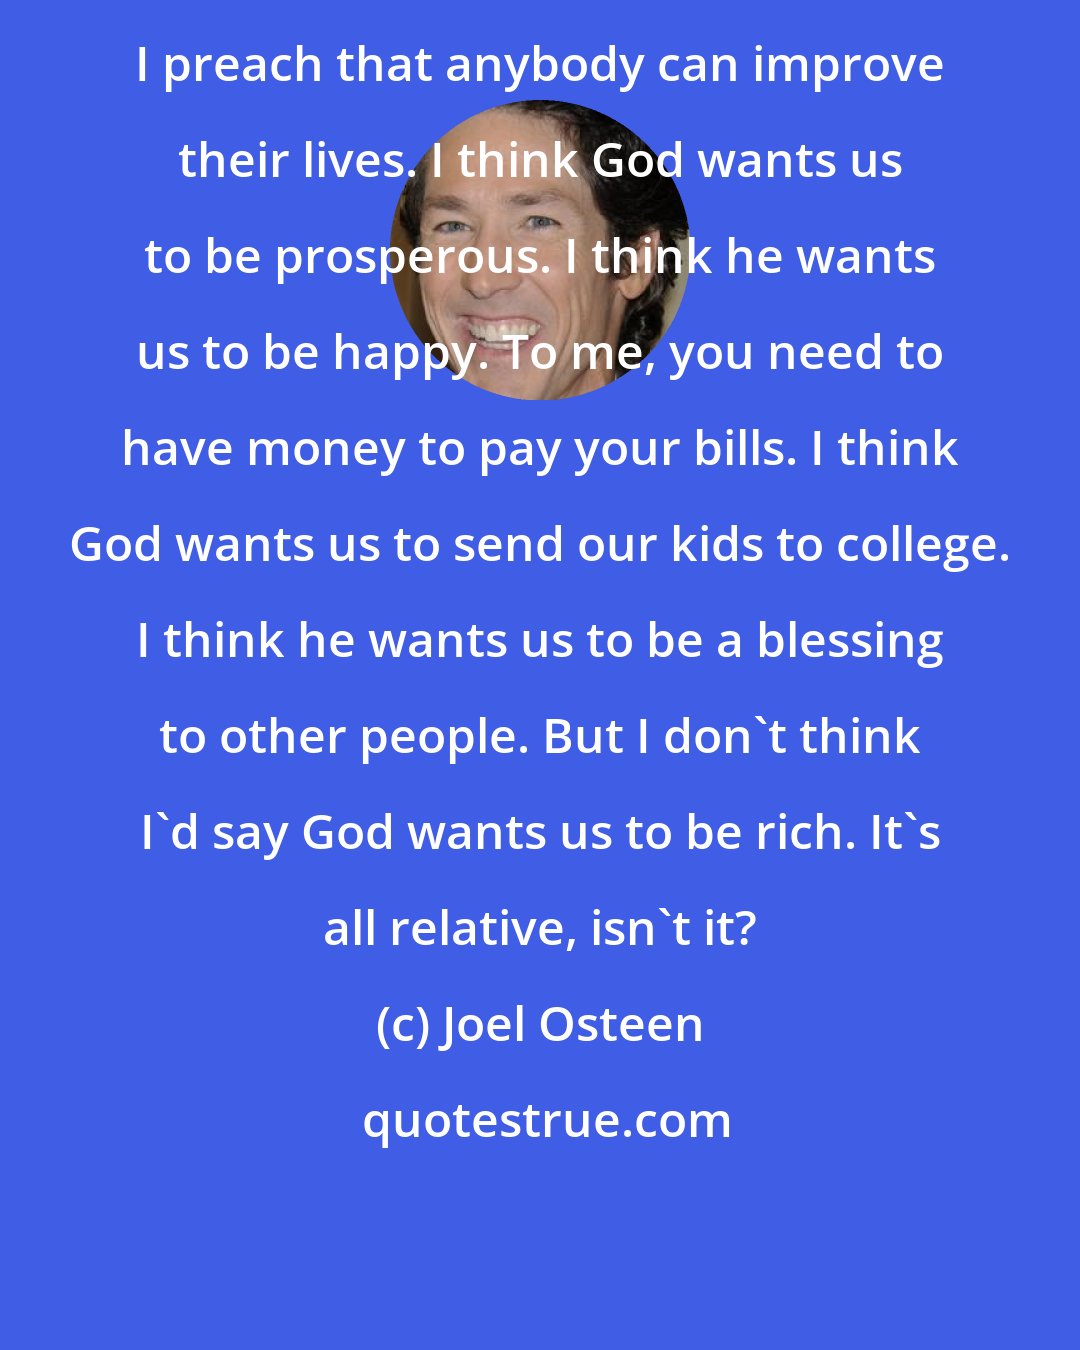 Joel Osteen: I preach that anybody can improve their lives. I think God wants us to be prosperous. I think he wants us to be happy. To me, you need to have money to pay your bills. I think God wants us to send our kids to college. I think he wants us to be a blessing to other people. But I don't think I'd say God wants us to be rich. It's all relative, isn't it?